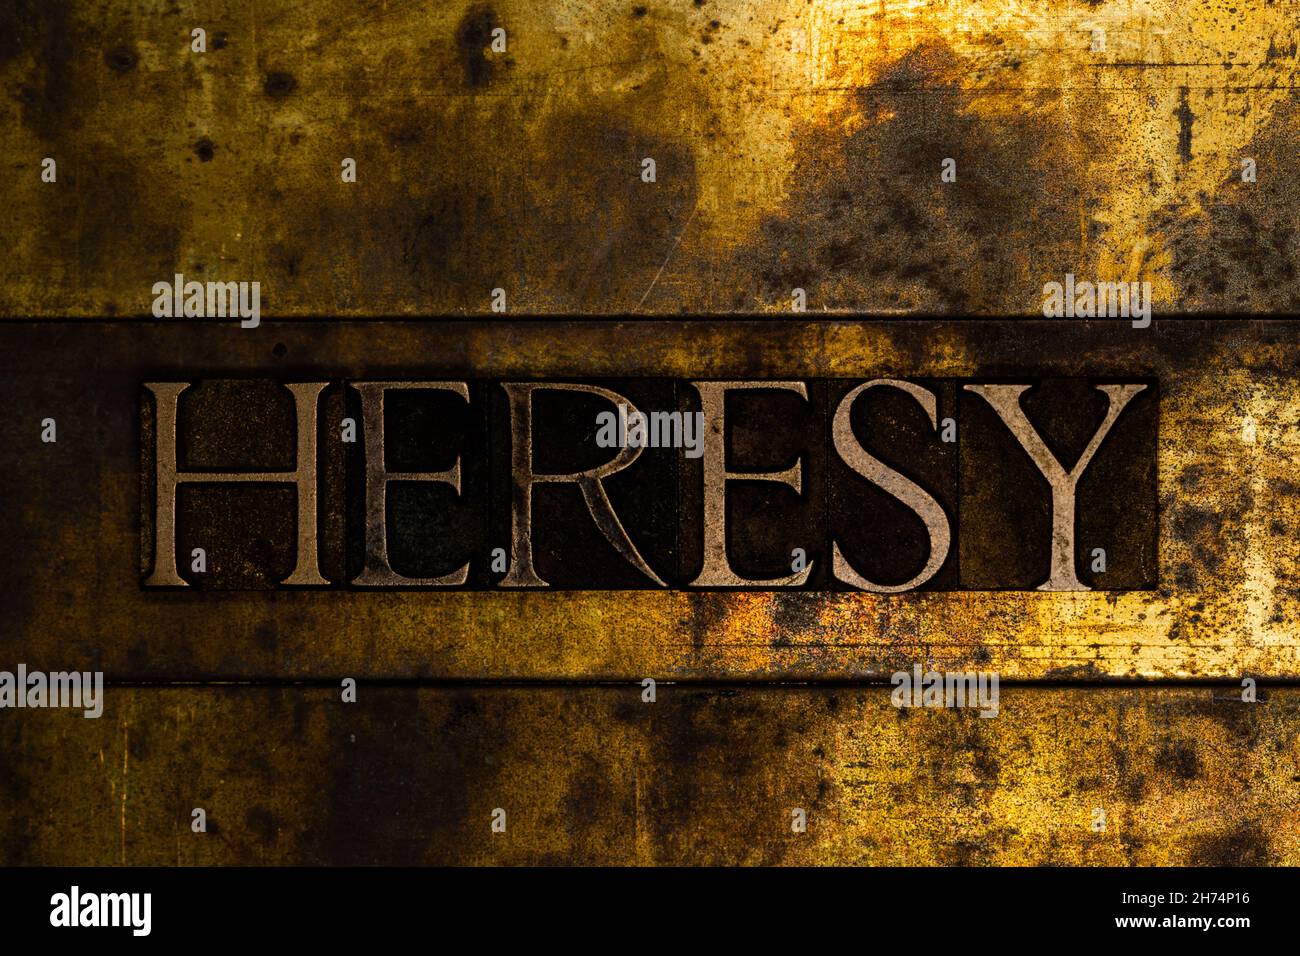 Heresy text message on textured grunge copper and vintage gold background Stock Photo